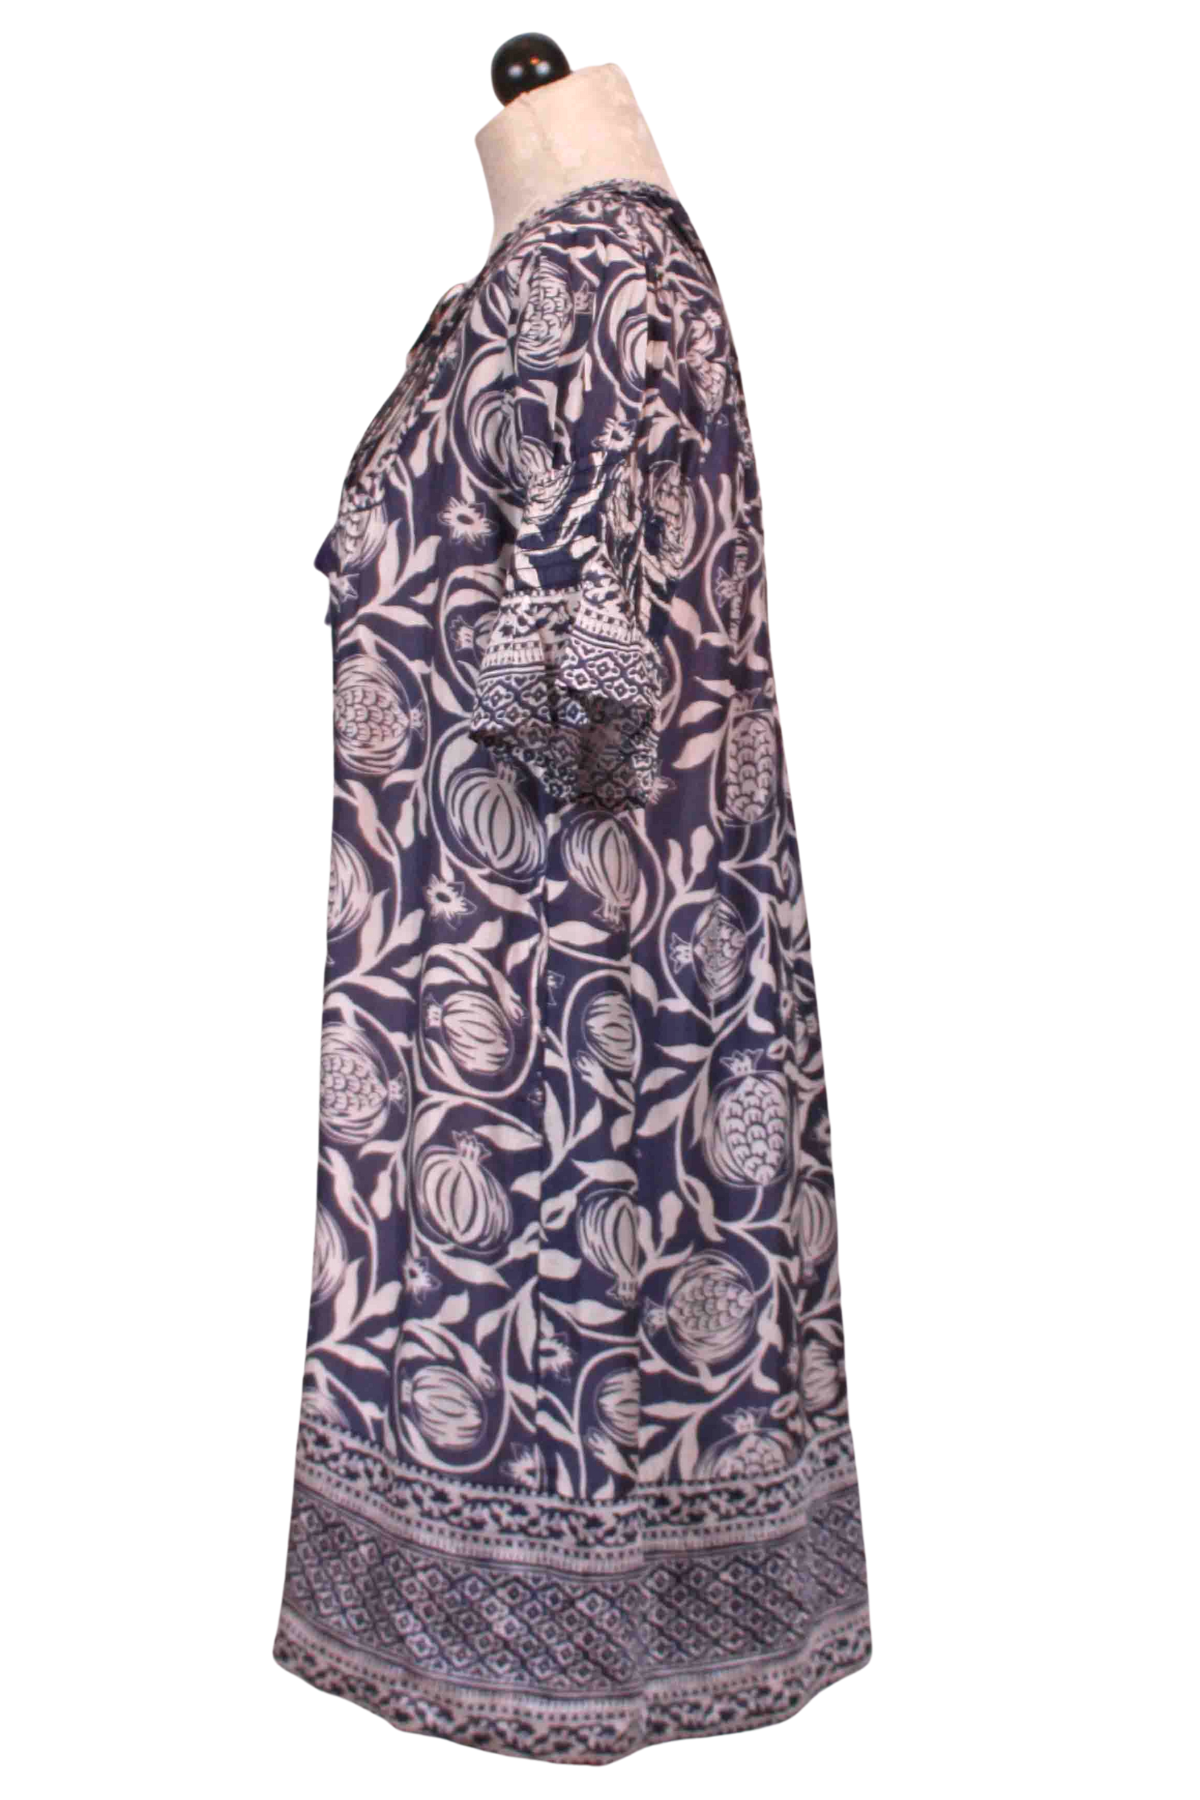 Side view of Navy and White Pomegranate Celerie Dress by La Plage